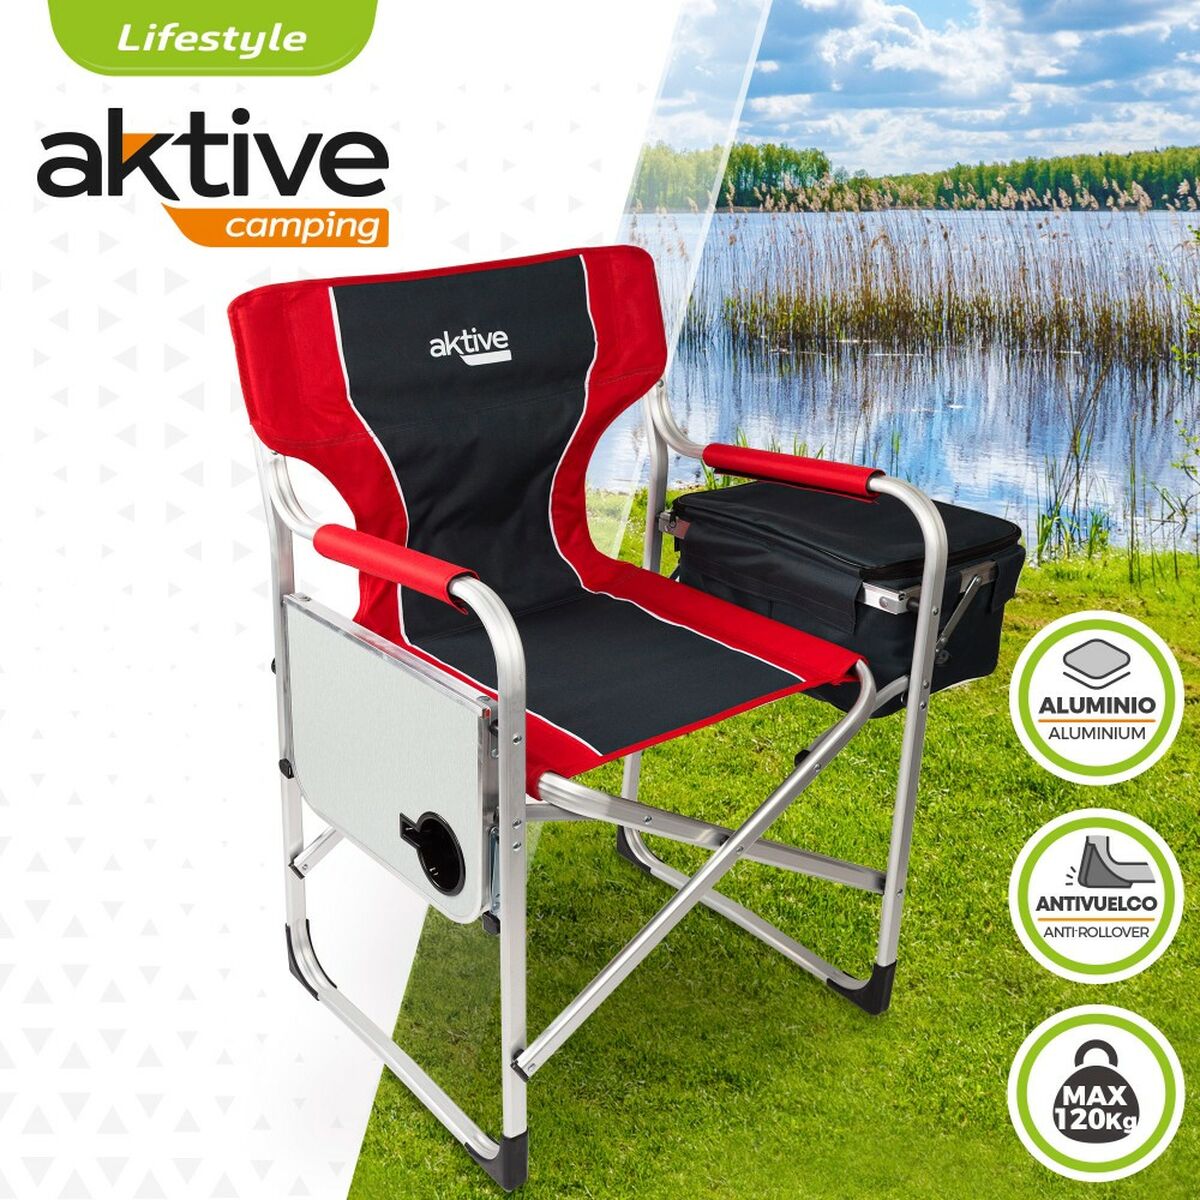 Foldable Camping Chair Aktive Red Grey 61 x 92 x 52 cm (2 Units)